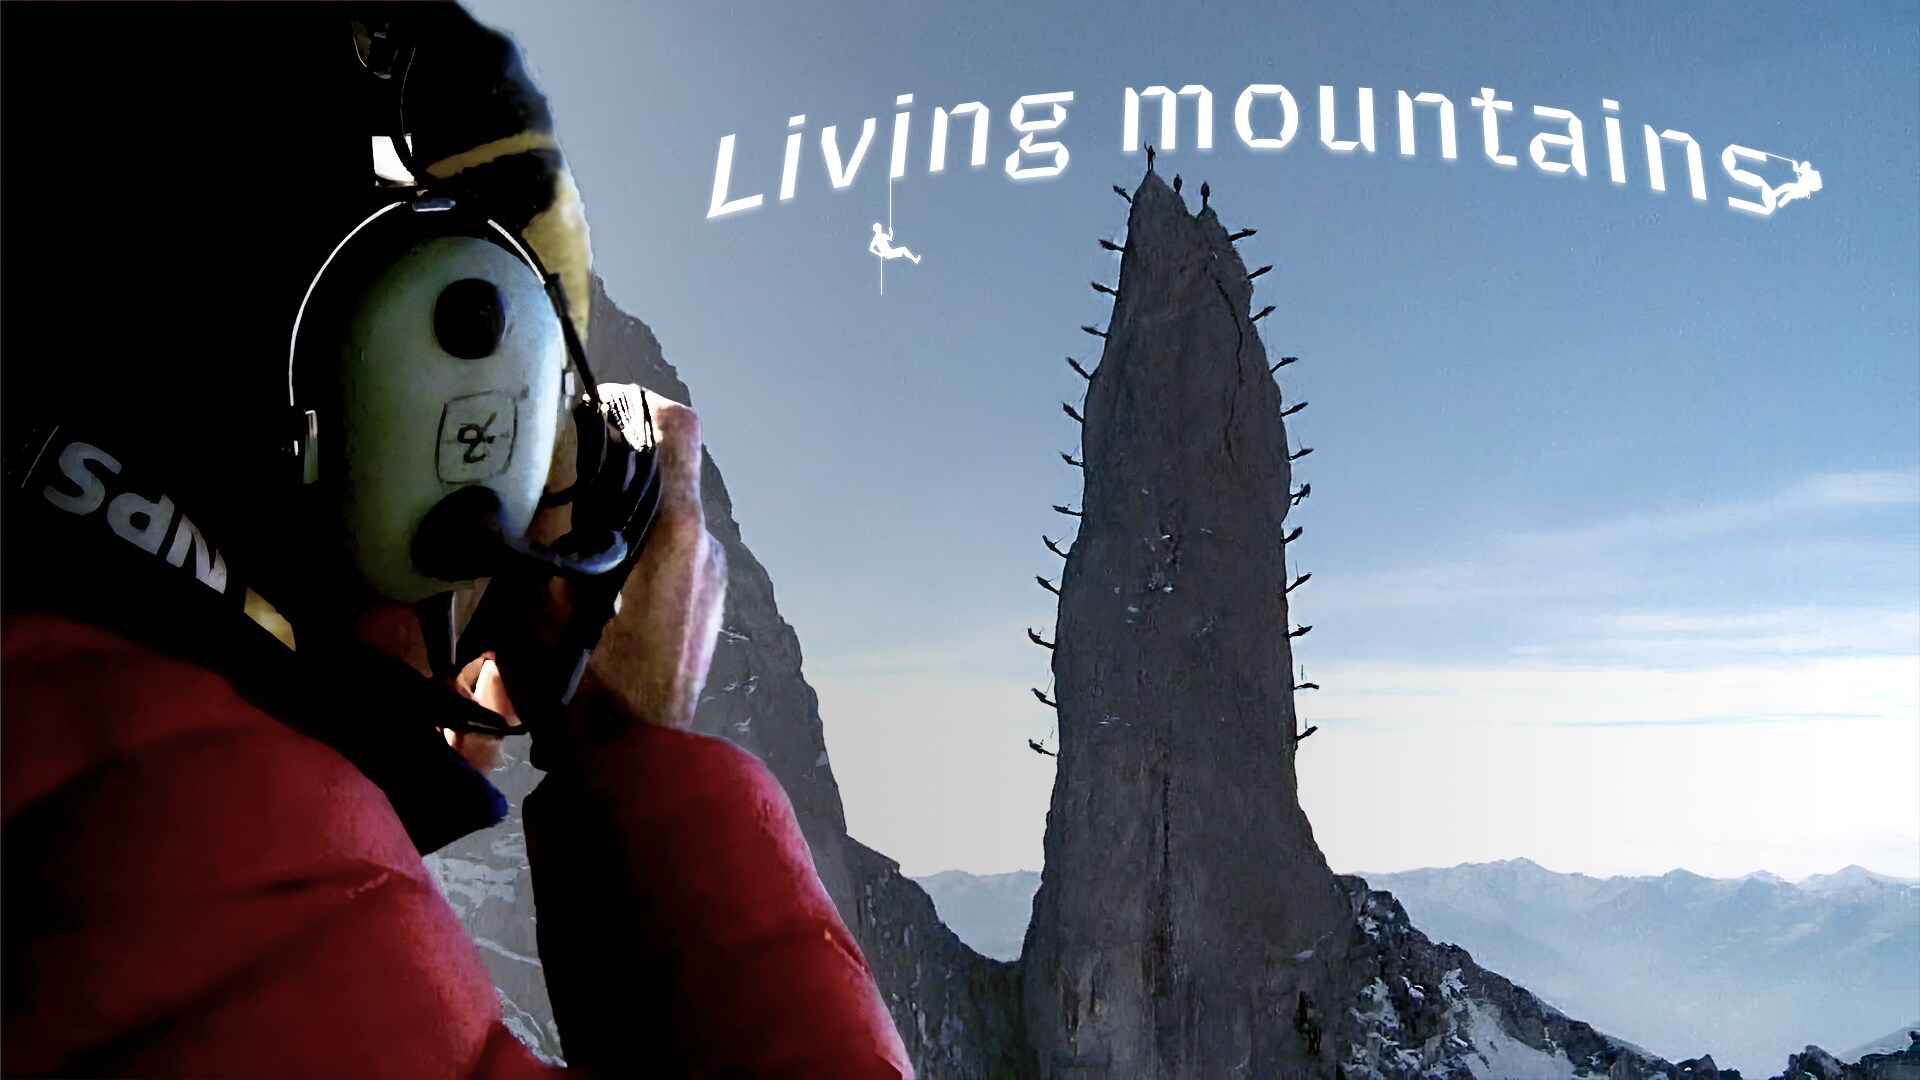 Living mountains